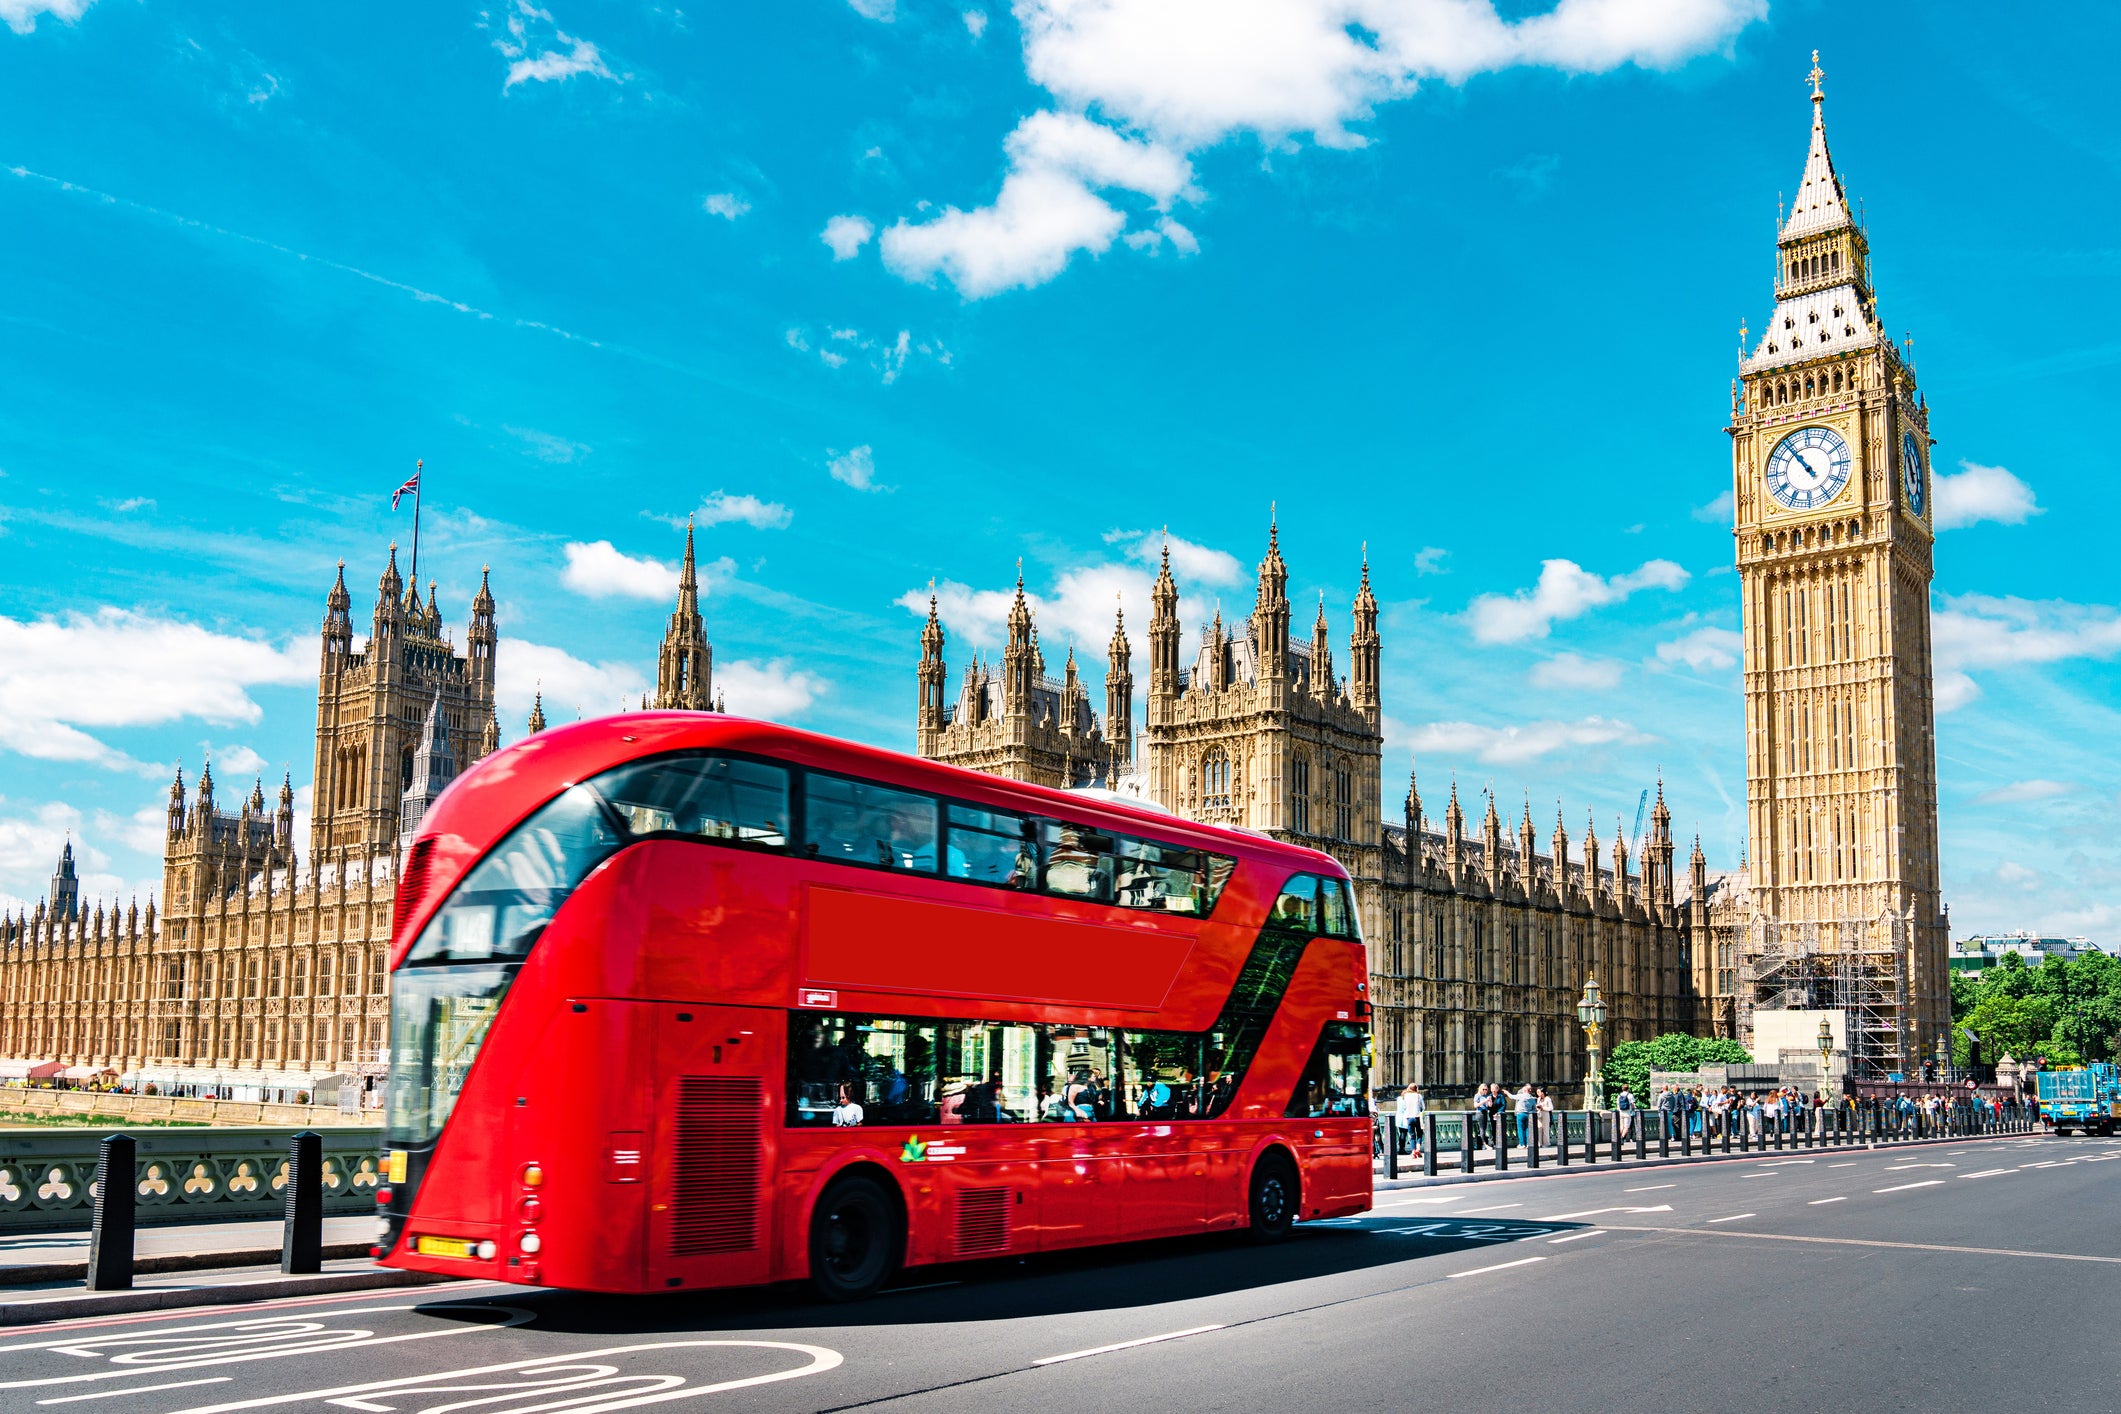 Pack your bags: Fly nonstop to London from $598 round trip